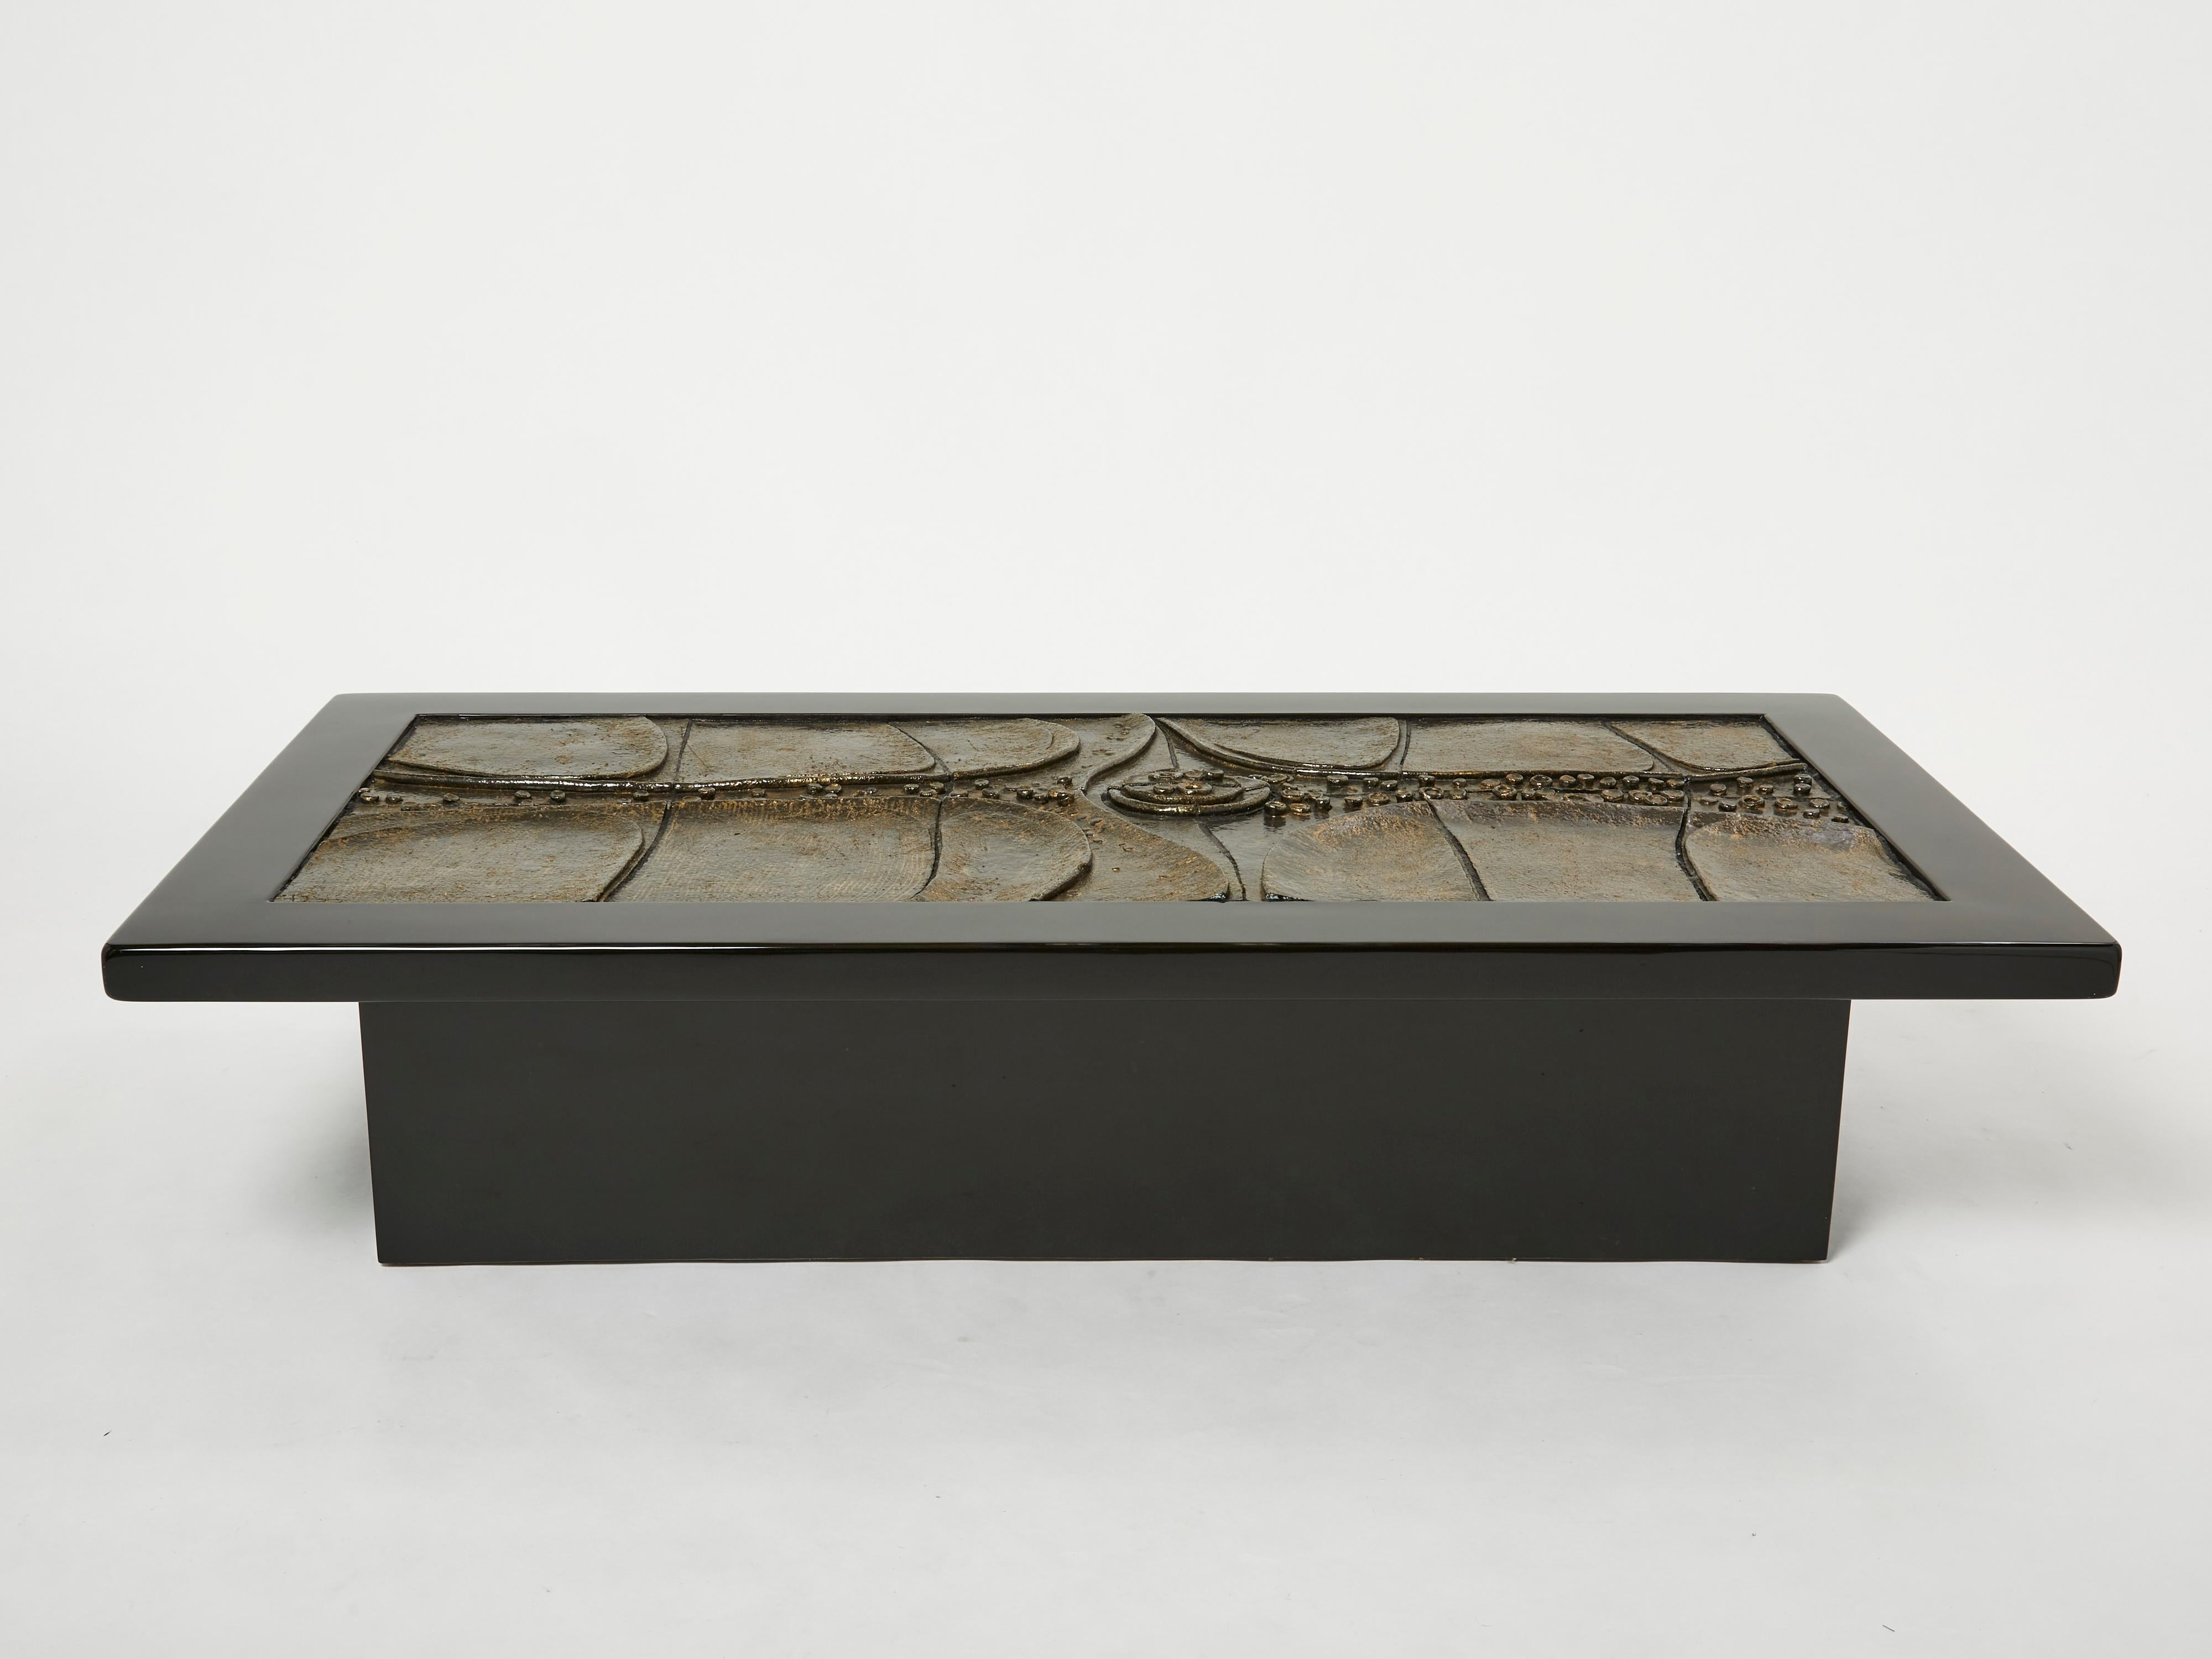 Beautiful and unique Brutalist coffee table by Belgian collective Pia Manu made in the early 1970s. Solid black lacquered structure and feet are framing a bronze patinated sculpture made of ceramic, that looks like a post modern abstract painting.